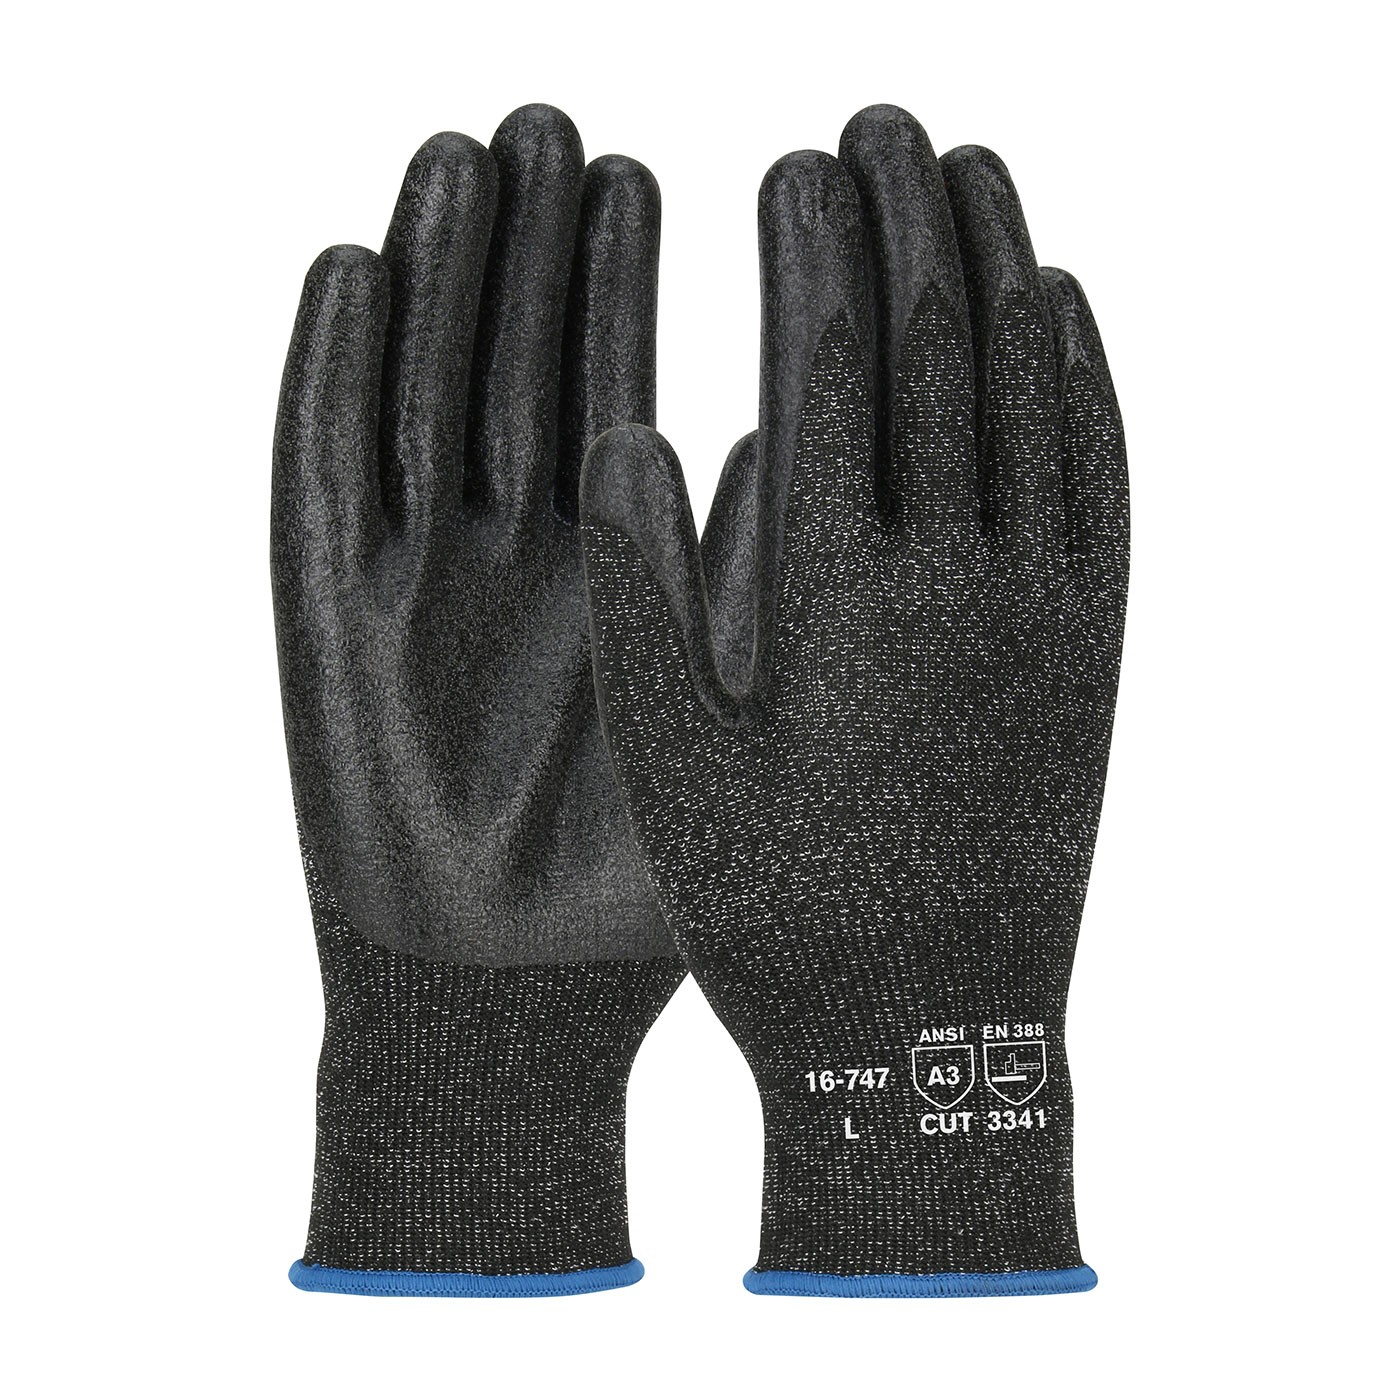 G-Tek® PolyKor® Seamless Knit PolyKor® Blended Glove with PVC Coated Smooth Grip on Palm & Fingers  (#16-747)